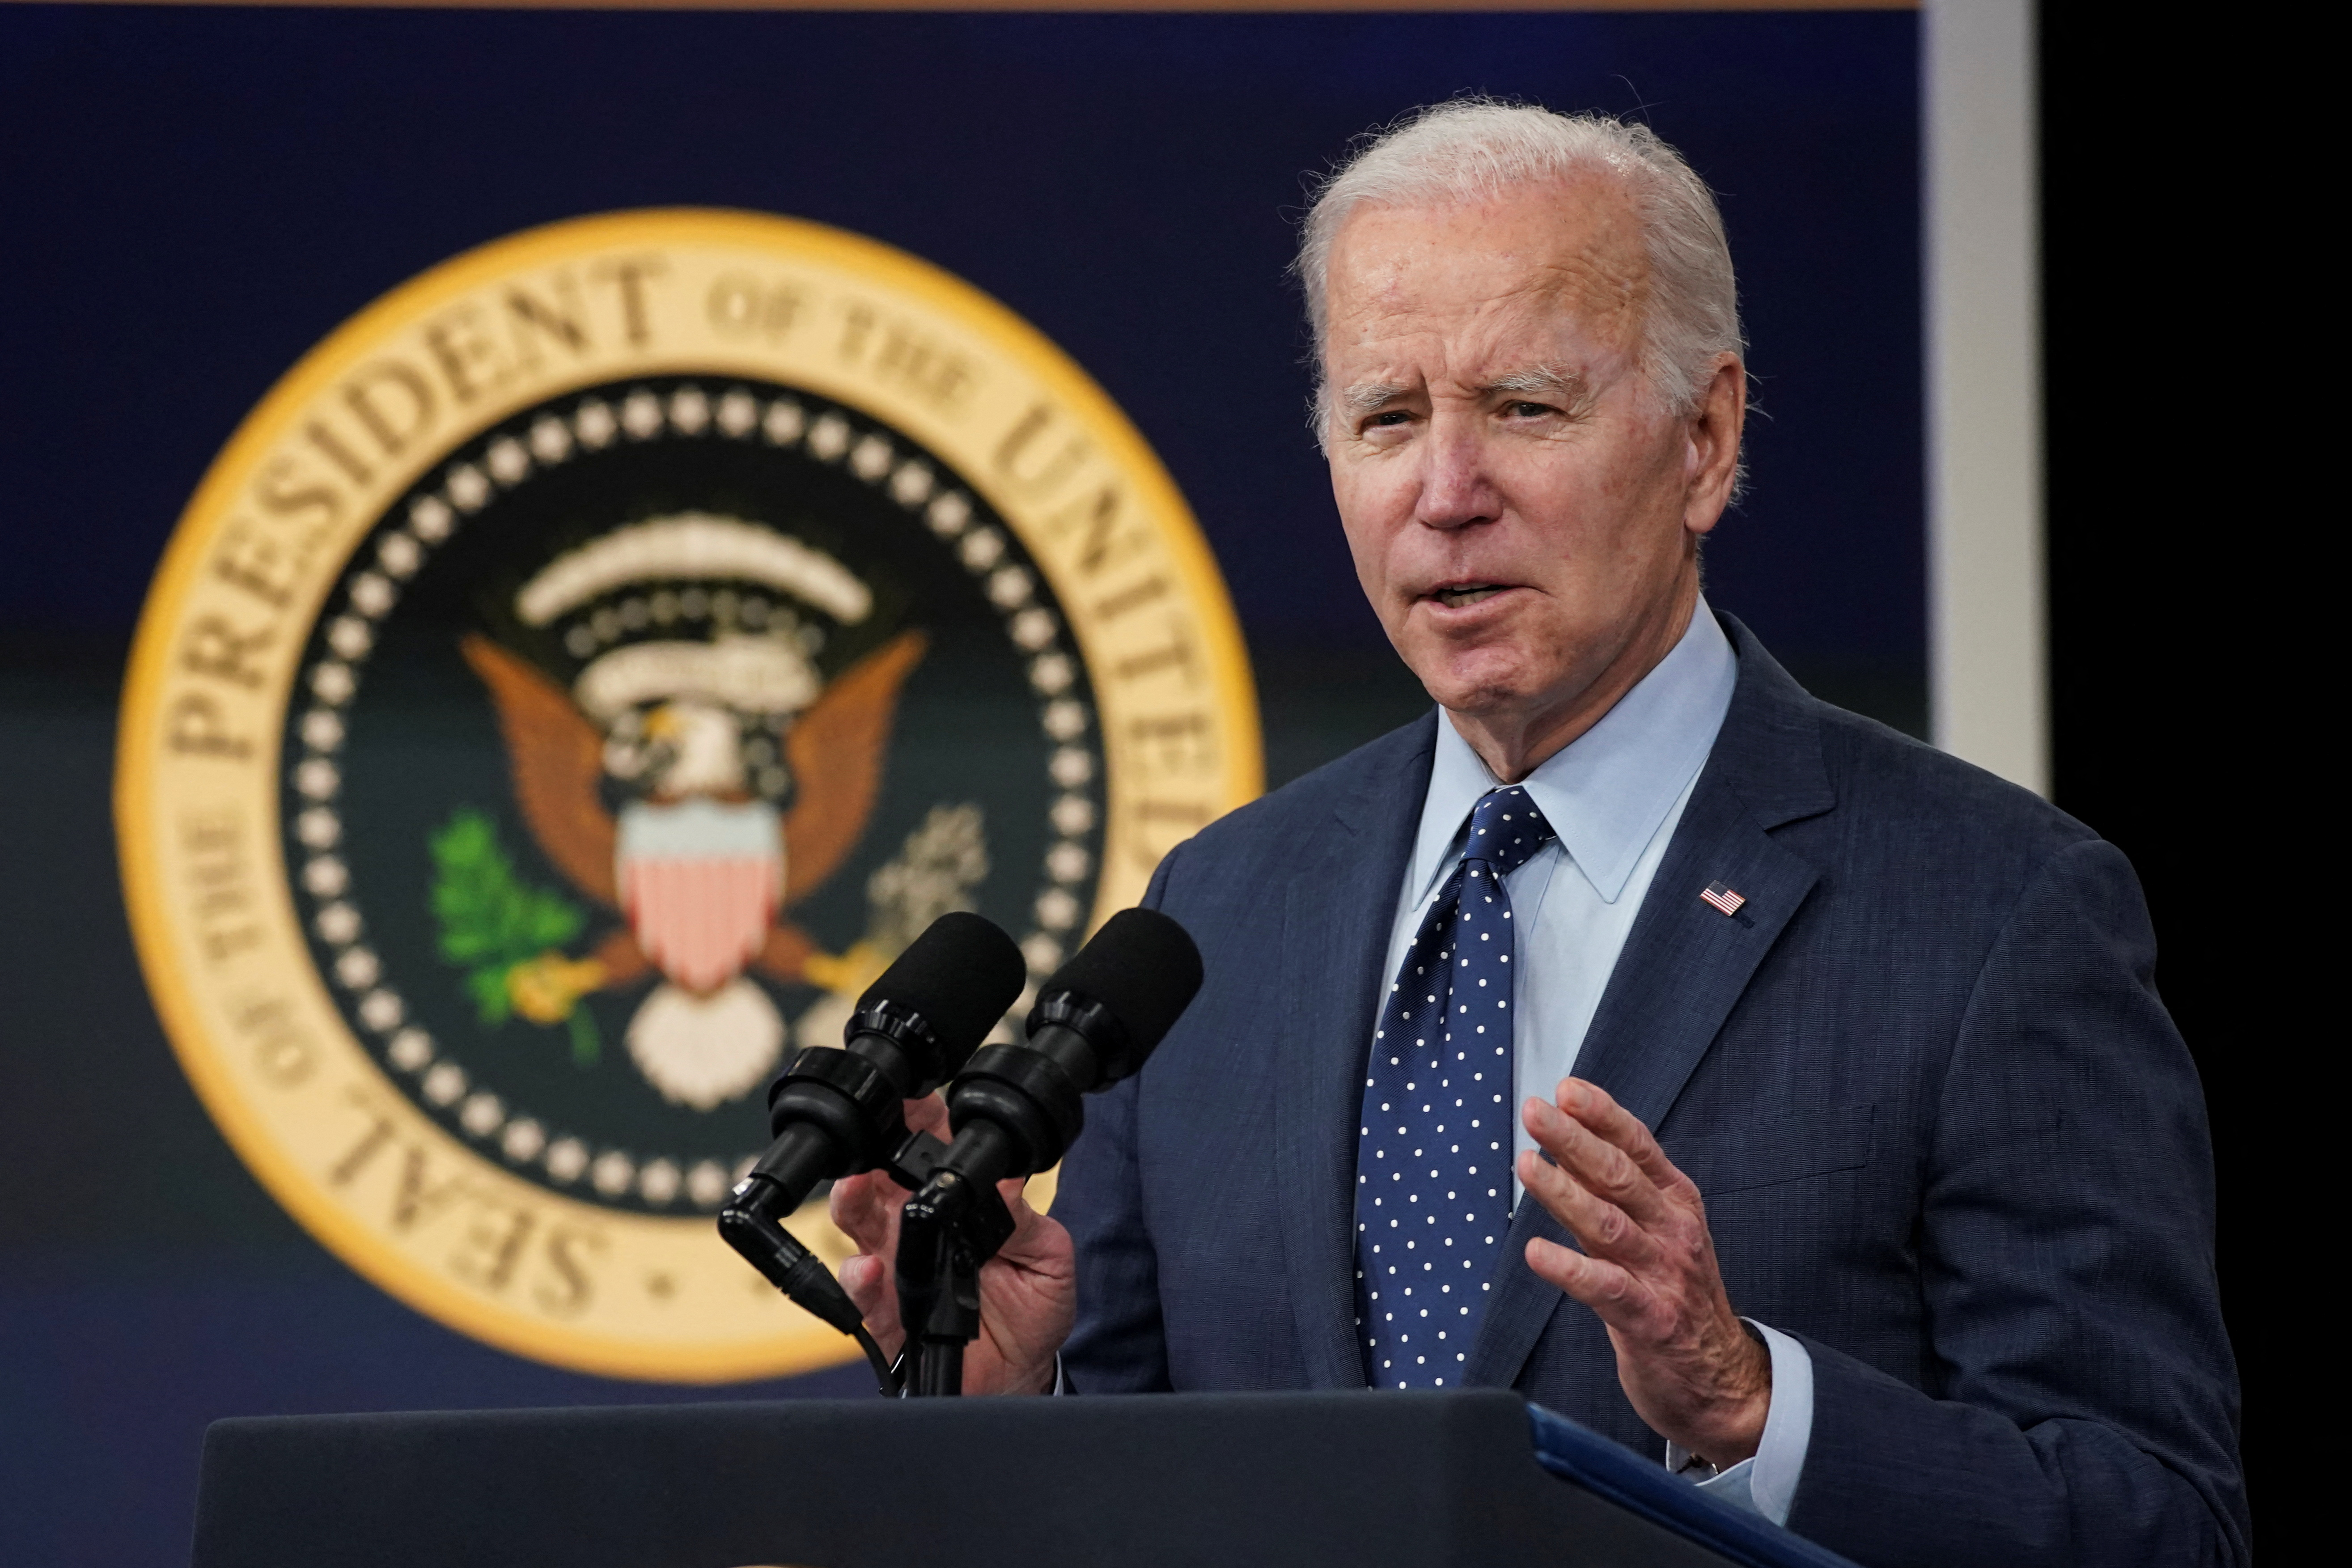 U.S. President Biden speaks about Chinese balloon and unidentified objects during remarks at the White House in Washington